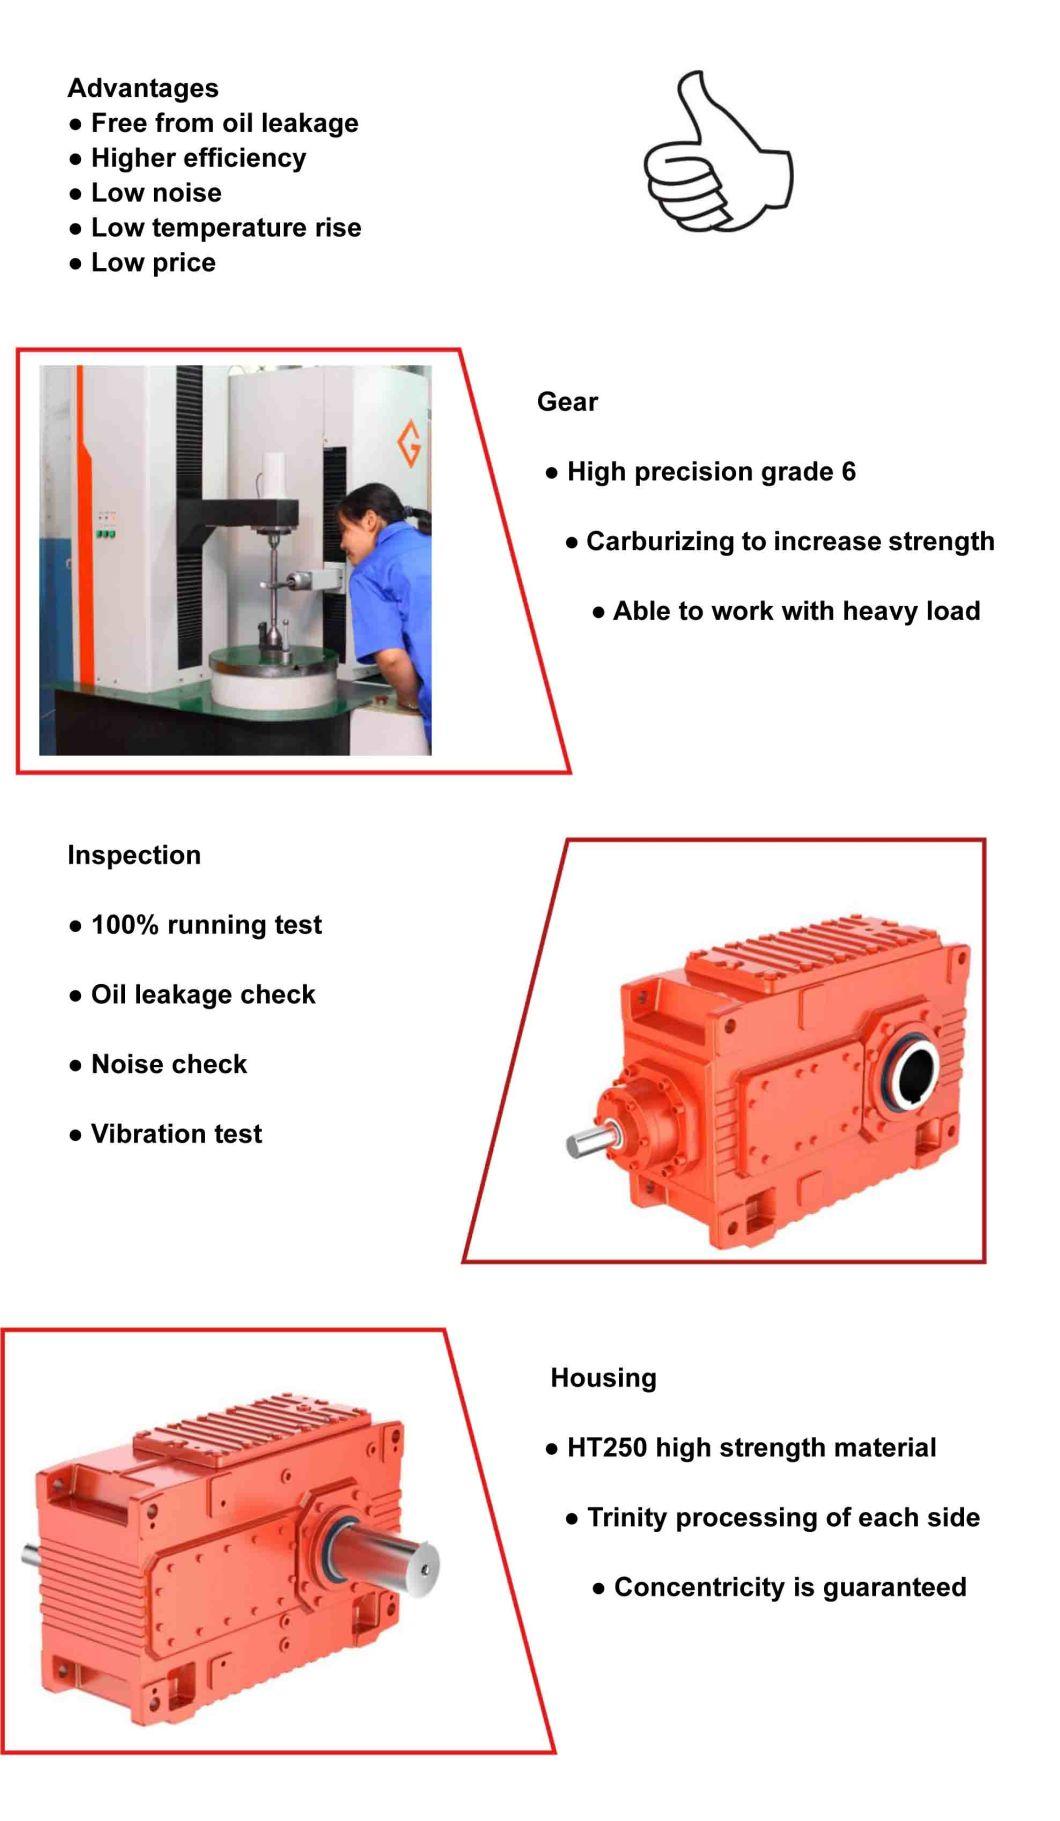 Hb PV Industrial High Power Big Torque Right Angle Hollow Shaft Bevel Helical Transmission Gearbox Gear Boxes